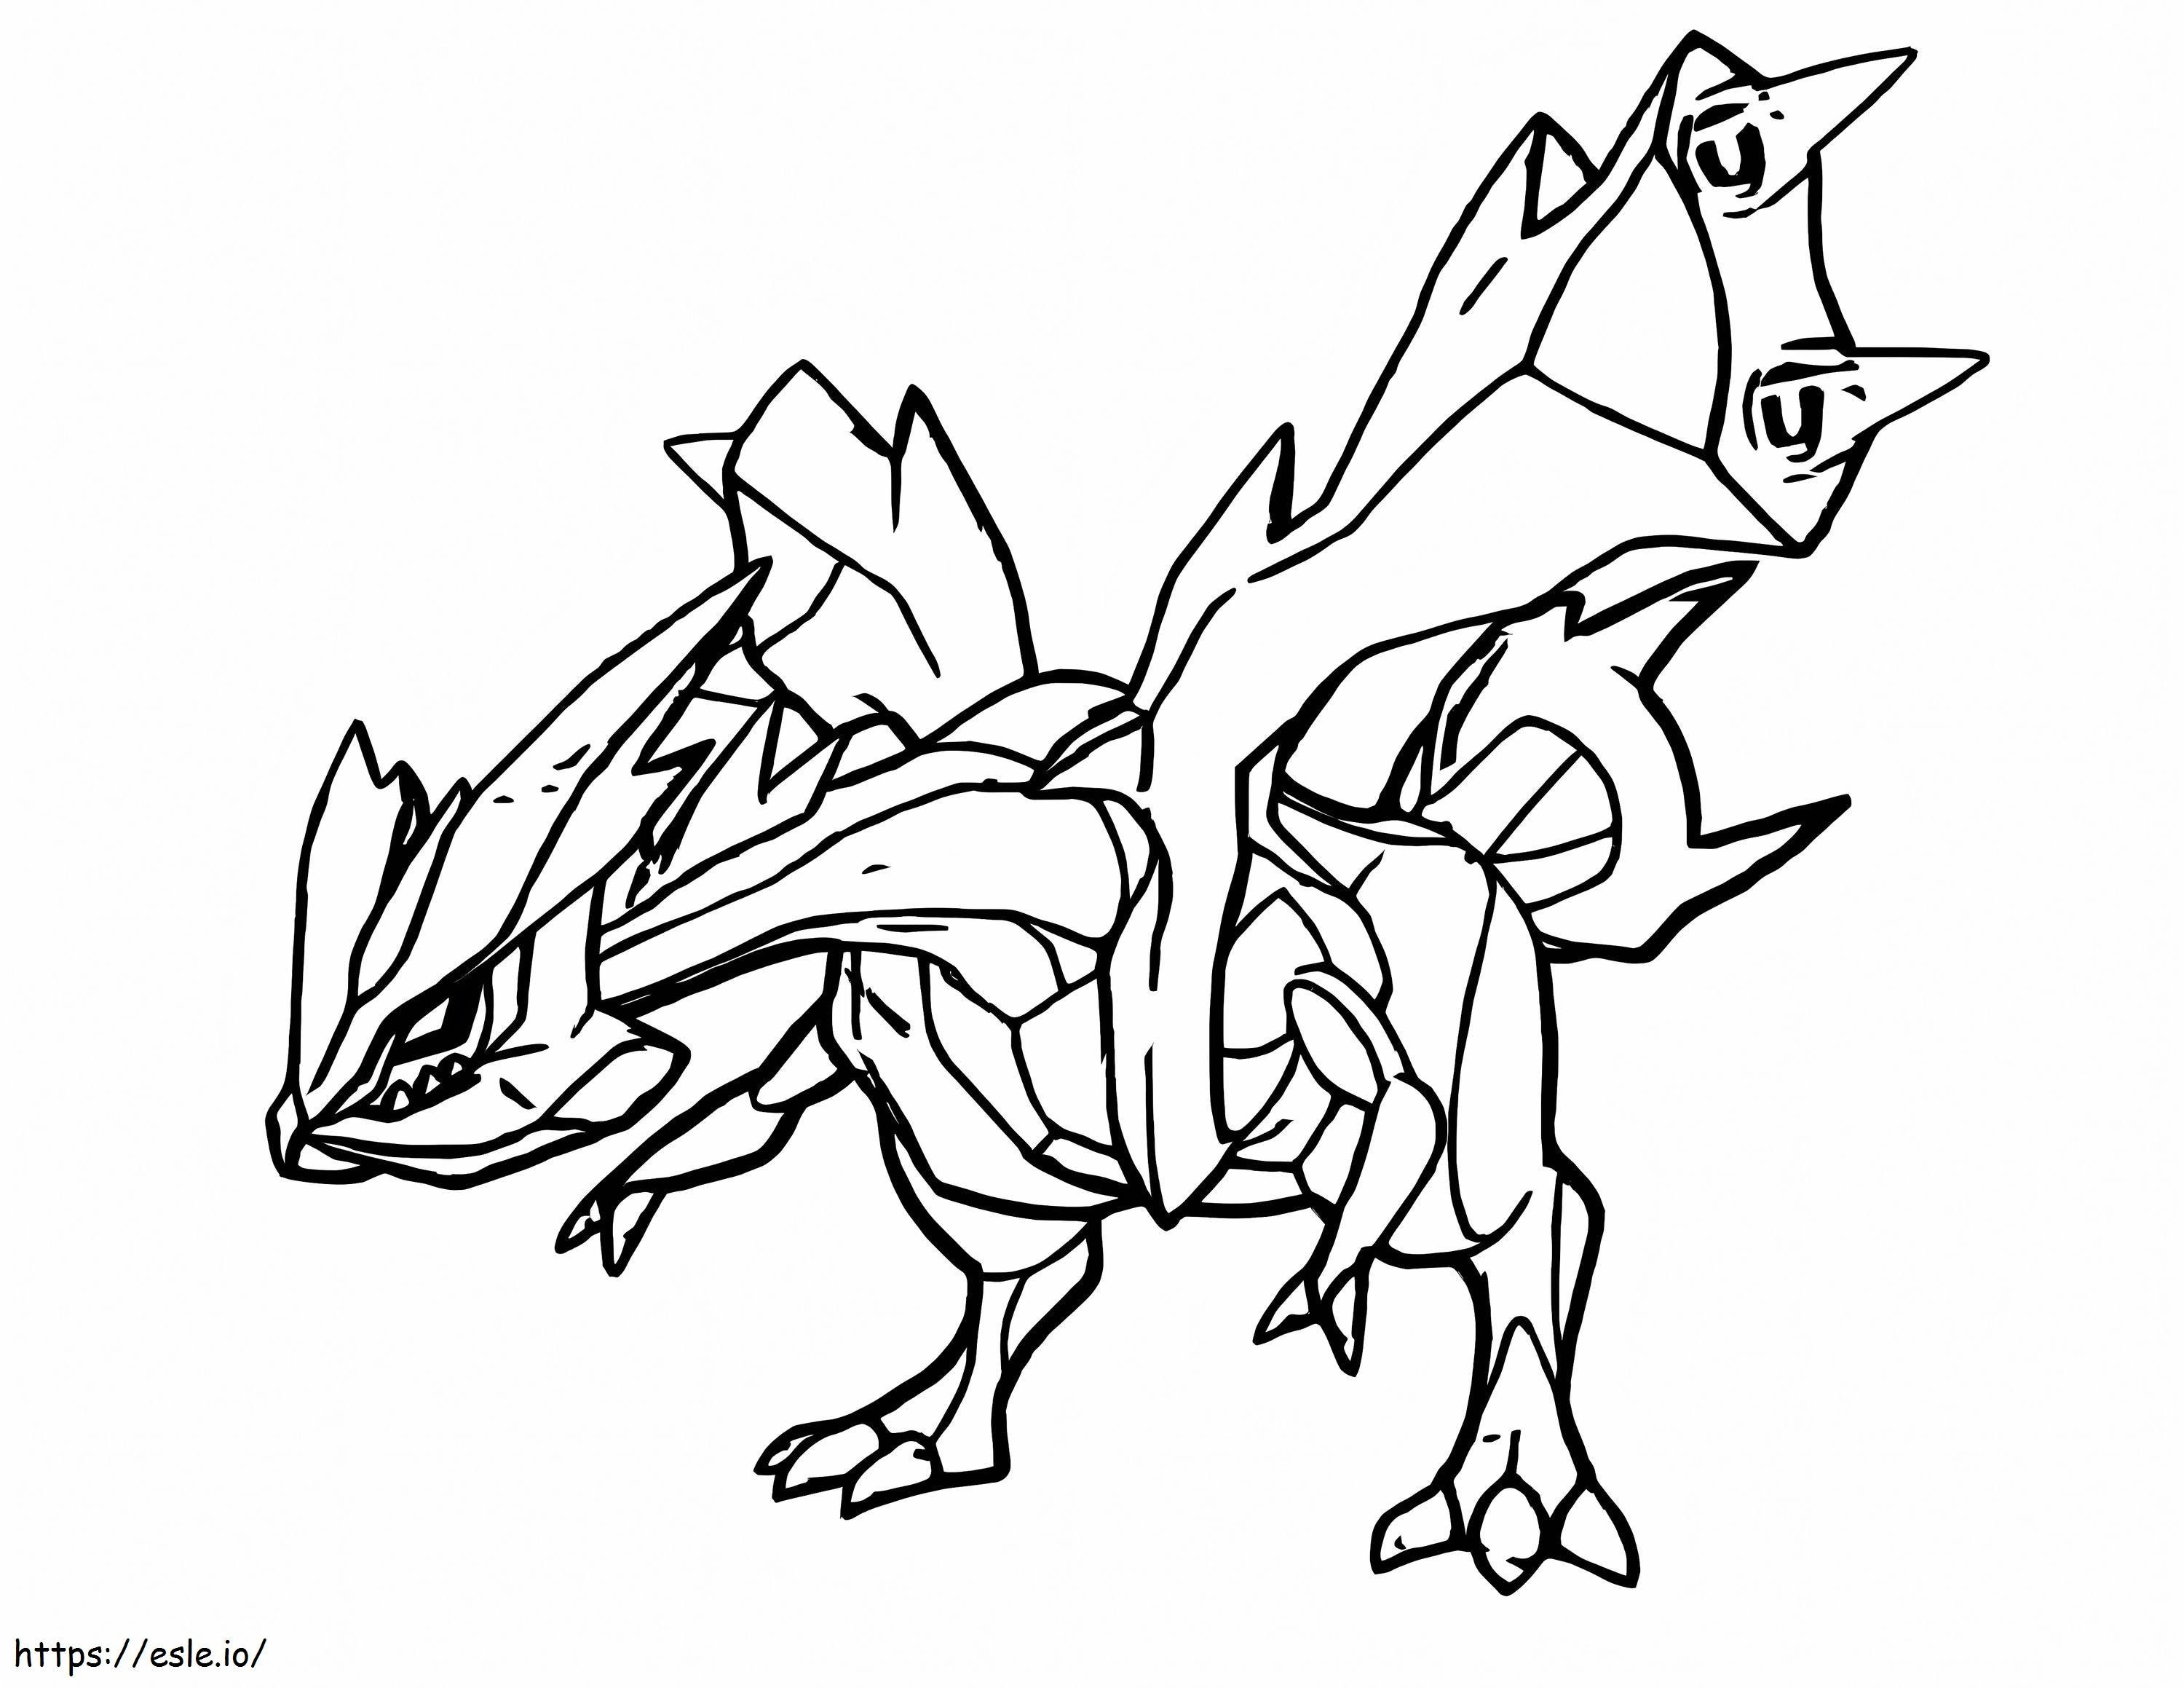 Kyurem In Legendary Pokemon coloring page